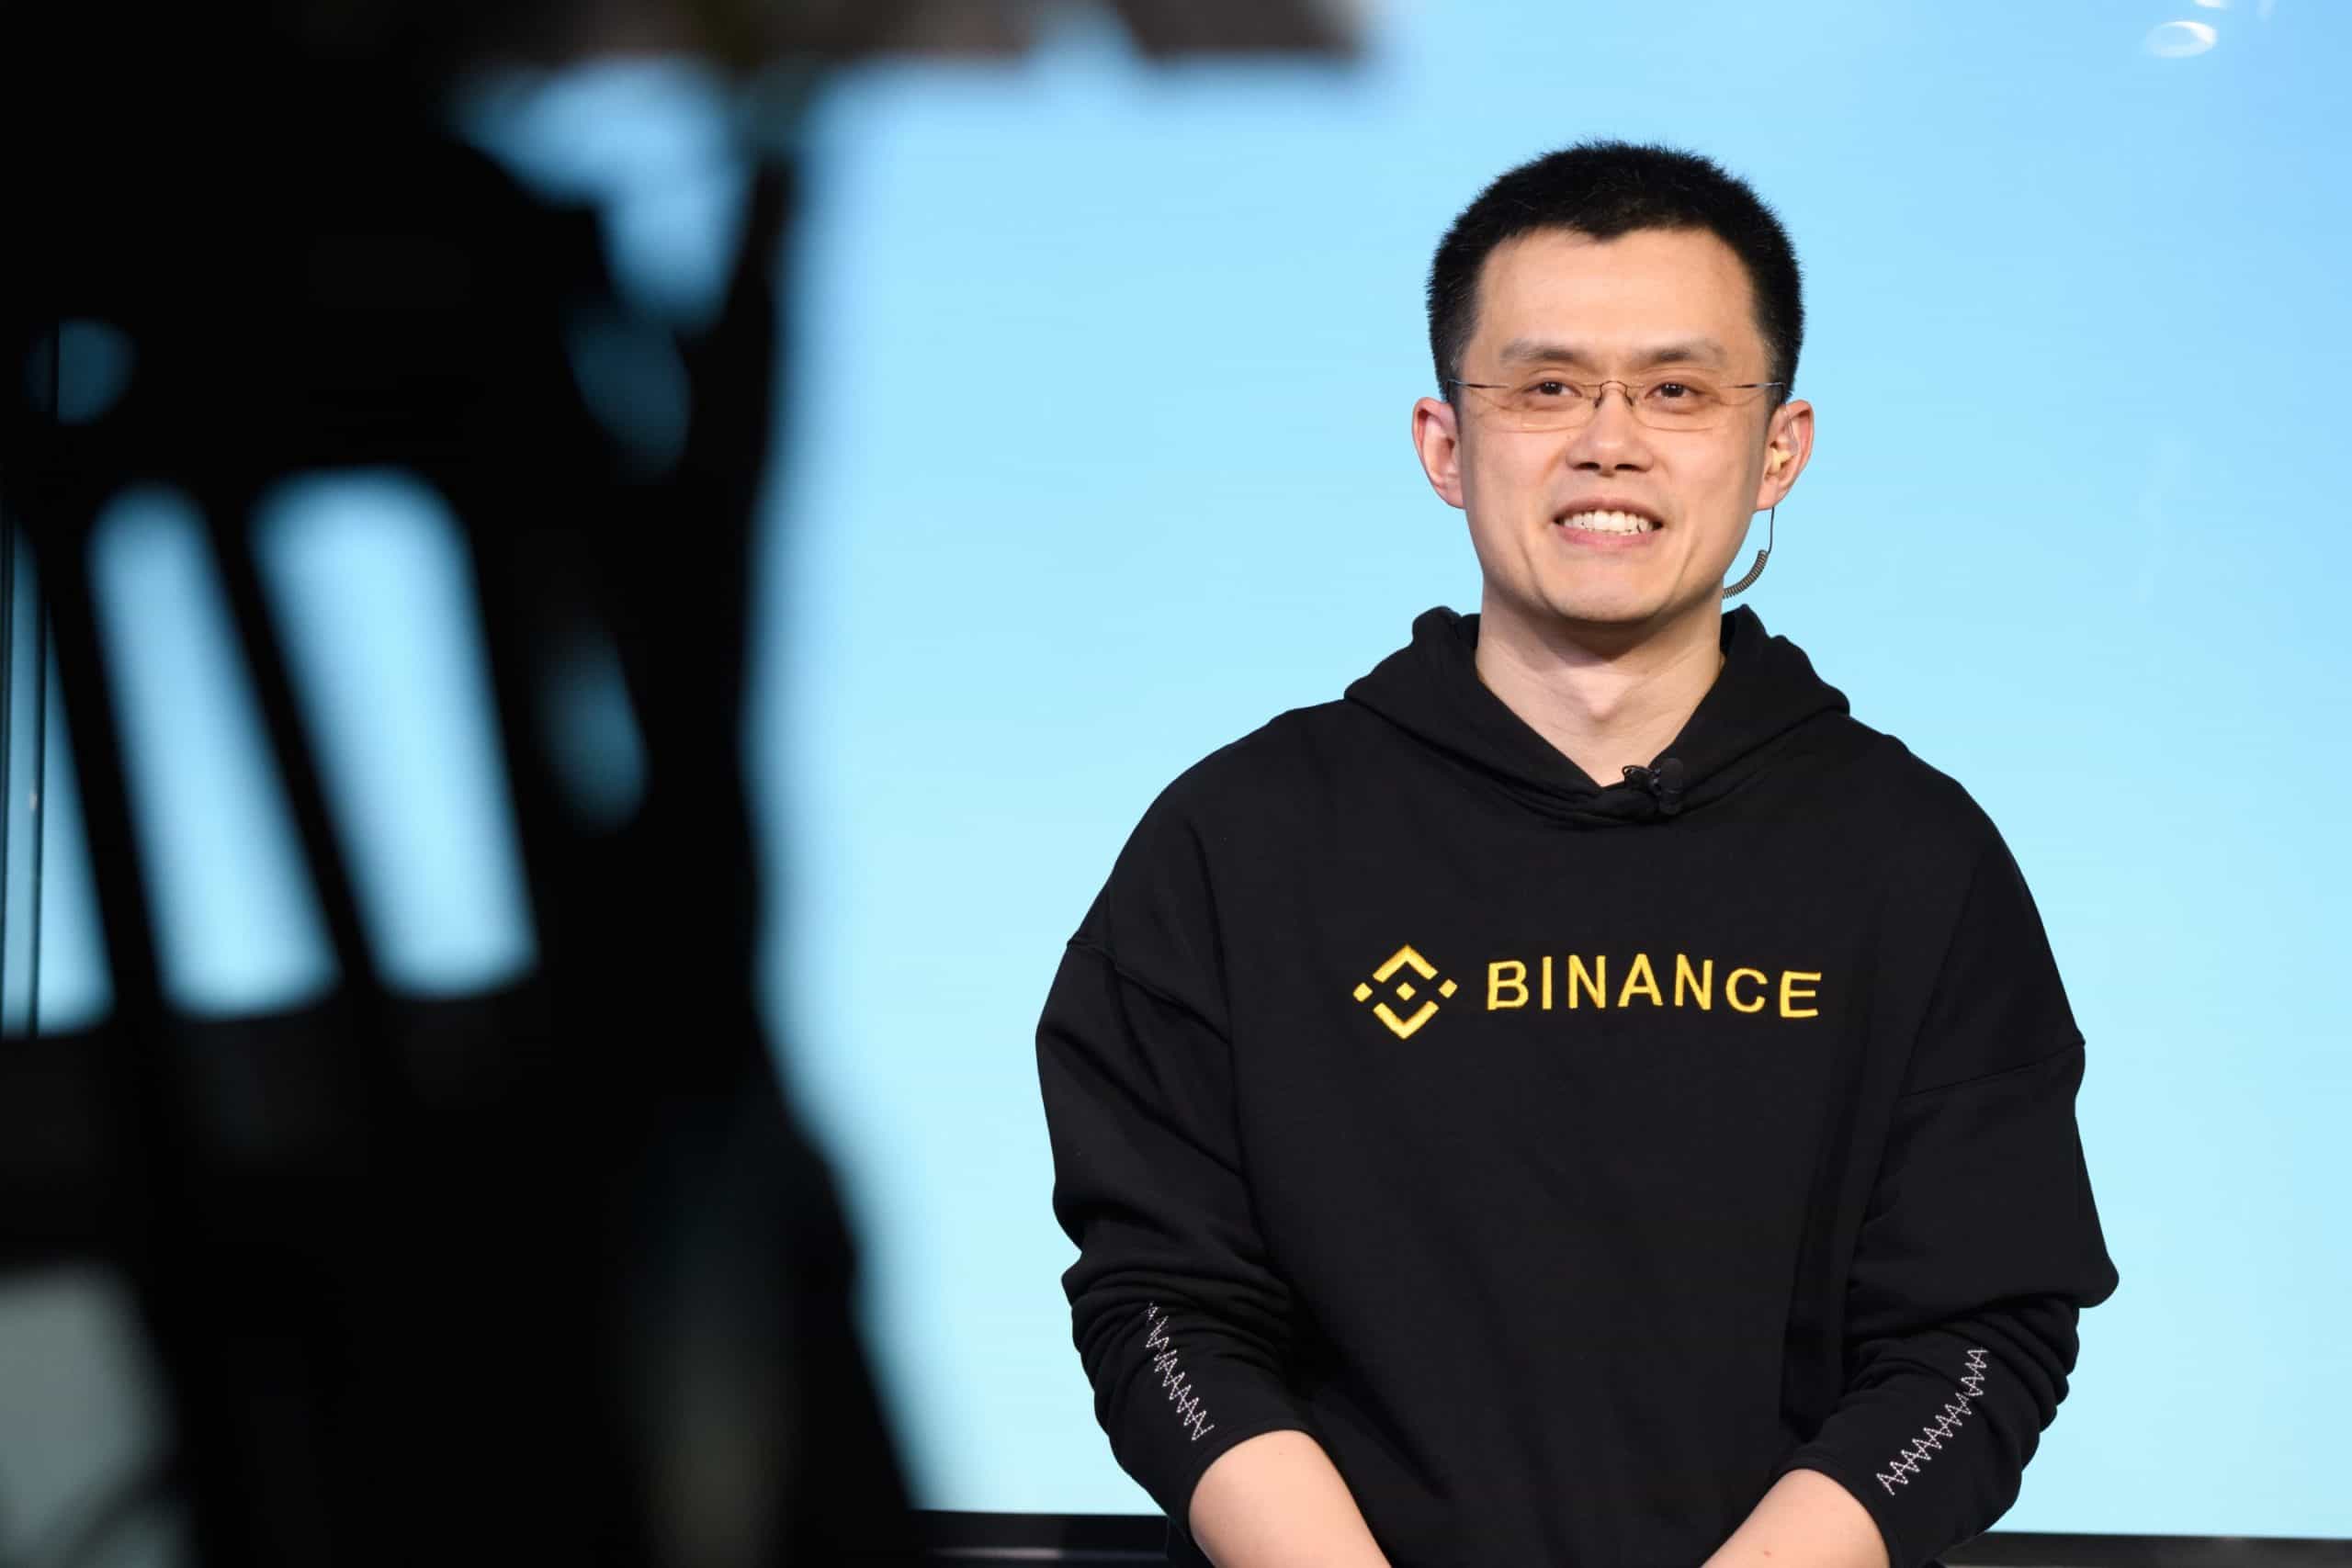 Binance-ceo-says-this-recent-event-might-signal-a-bull-market